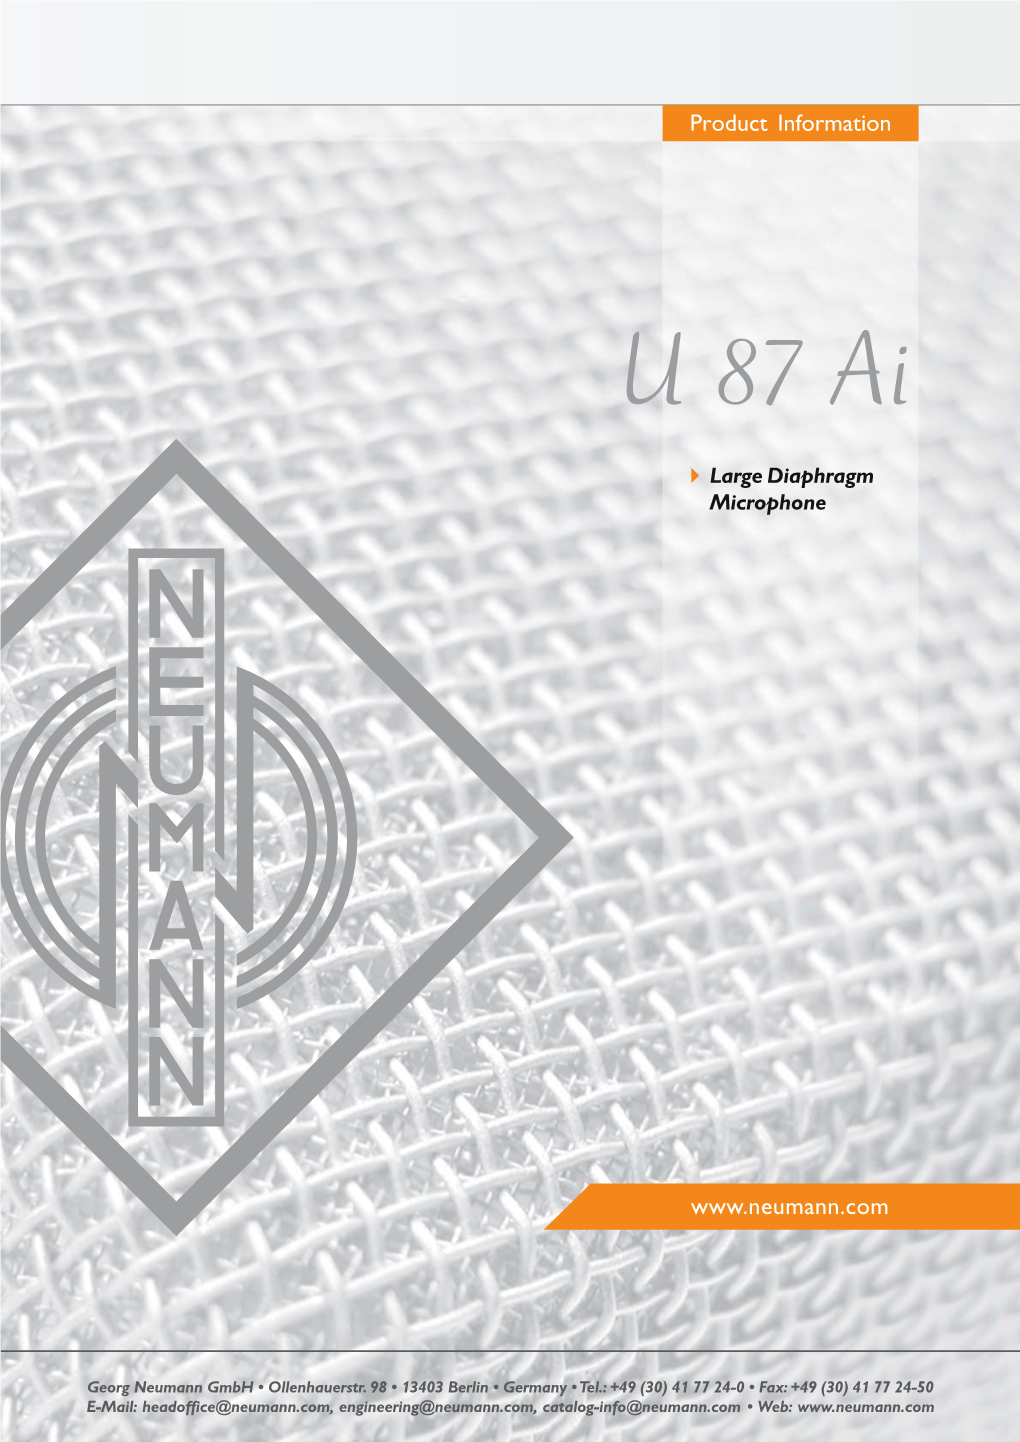 U 87 Ai Condenser Microphone Is a Large Diaphragm Microphone with Three Polar Pat- Terns and a Unique Frequency and Transient Re- Sponse Characteristic